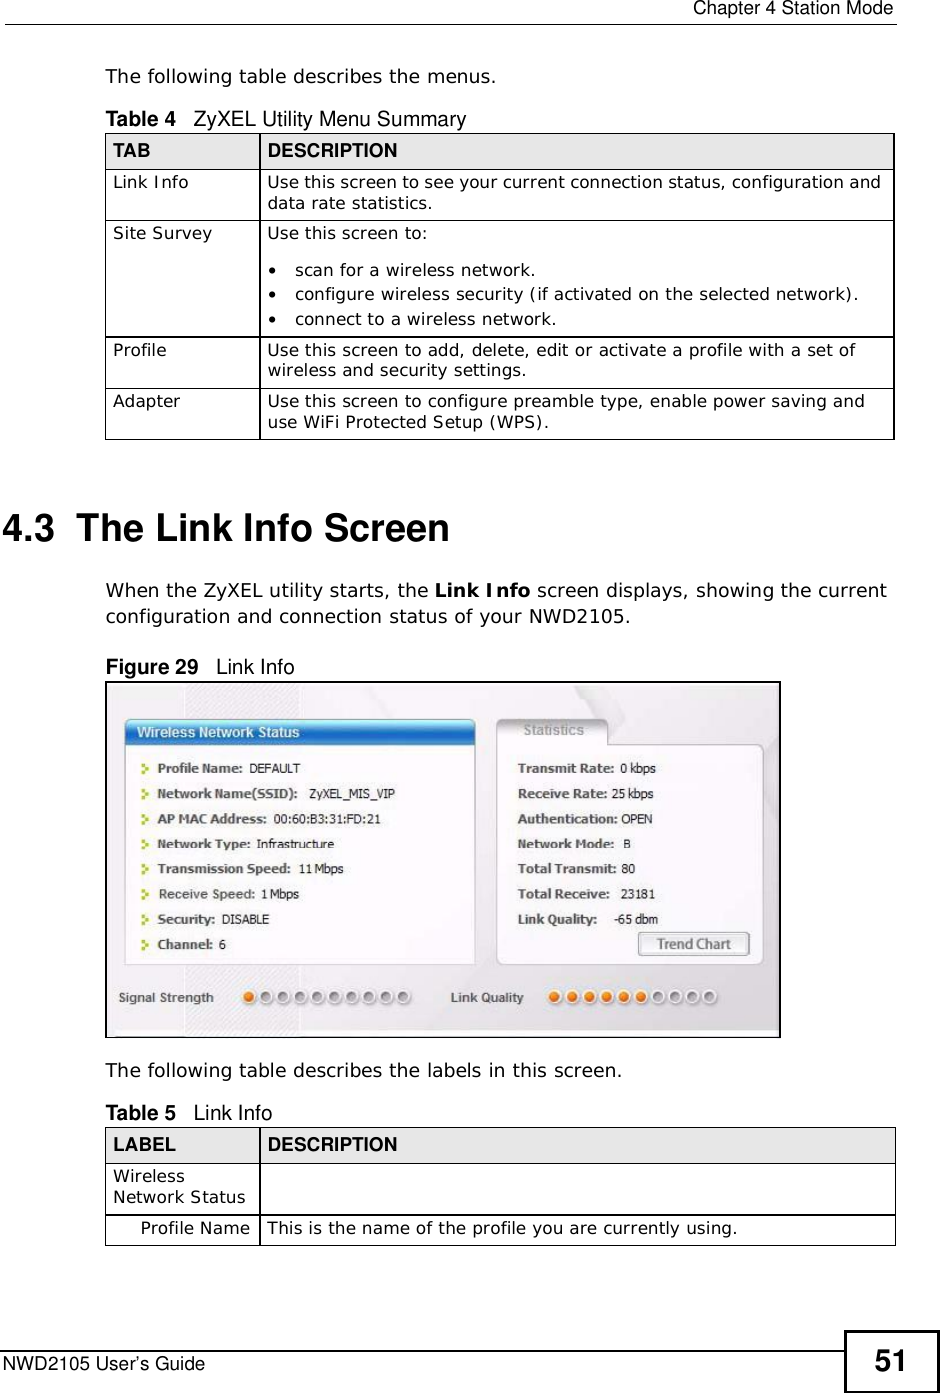  Chapter 4Station ModeNWD2105 User’s Guide 51The following table describes the menus. 4.3  The Link Info Screen When the ZyXEL utility starts, the Link Info screen displays, showing the current configuration and connection status of your NWD2105.Figure 29   Link Info The following table describes the labels in this screen. Table 4   ZyXEL Utility Menu SummaryTAB DESCRIPTIONLink InfoUse this screen to see your current connection status, configuration and data rate statistics.Site SurveyUse this screen to: •scan for a wireless network.•configure wireless security (if activated on the selected network).•connect to a wireless network.ProfileUse this screen to add, delete, edit or activate a profile with a set of wireless and security settings.AdapterUse this screen to configure preamble type, enable power saving and use WiFi Protected Setup (WPS).Table 5   Link Info LABEL DESCRIPTIONWirelessNetwork StatusProfile NameThis is the name of the profile you are currently using.